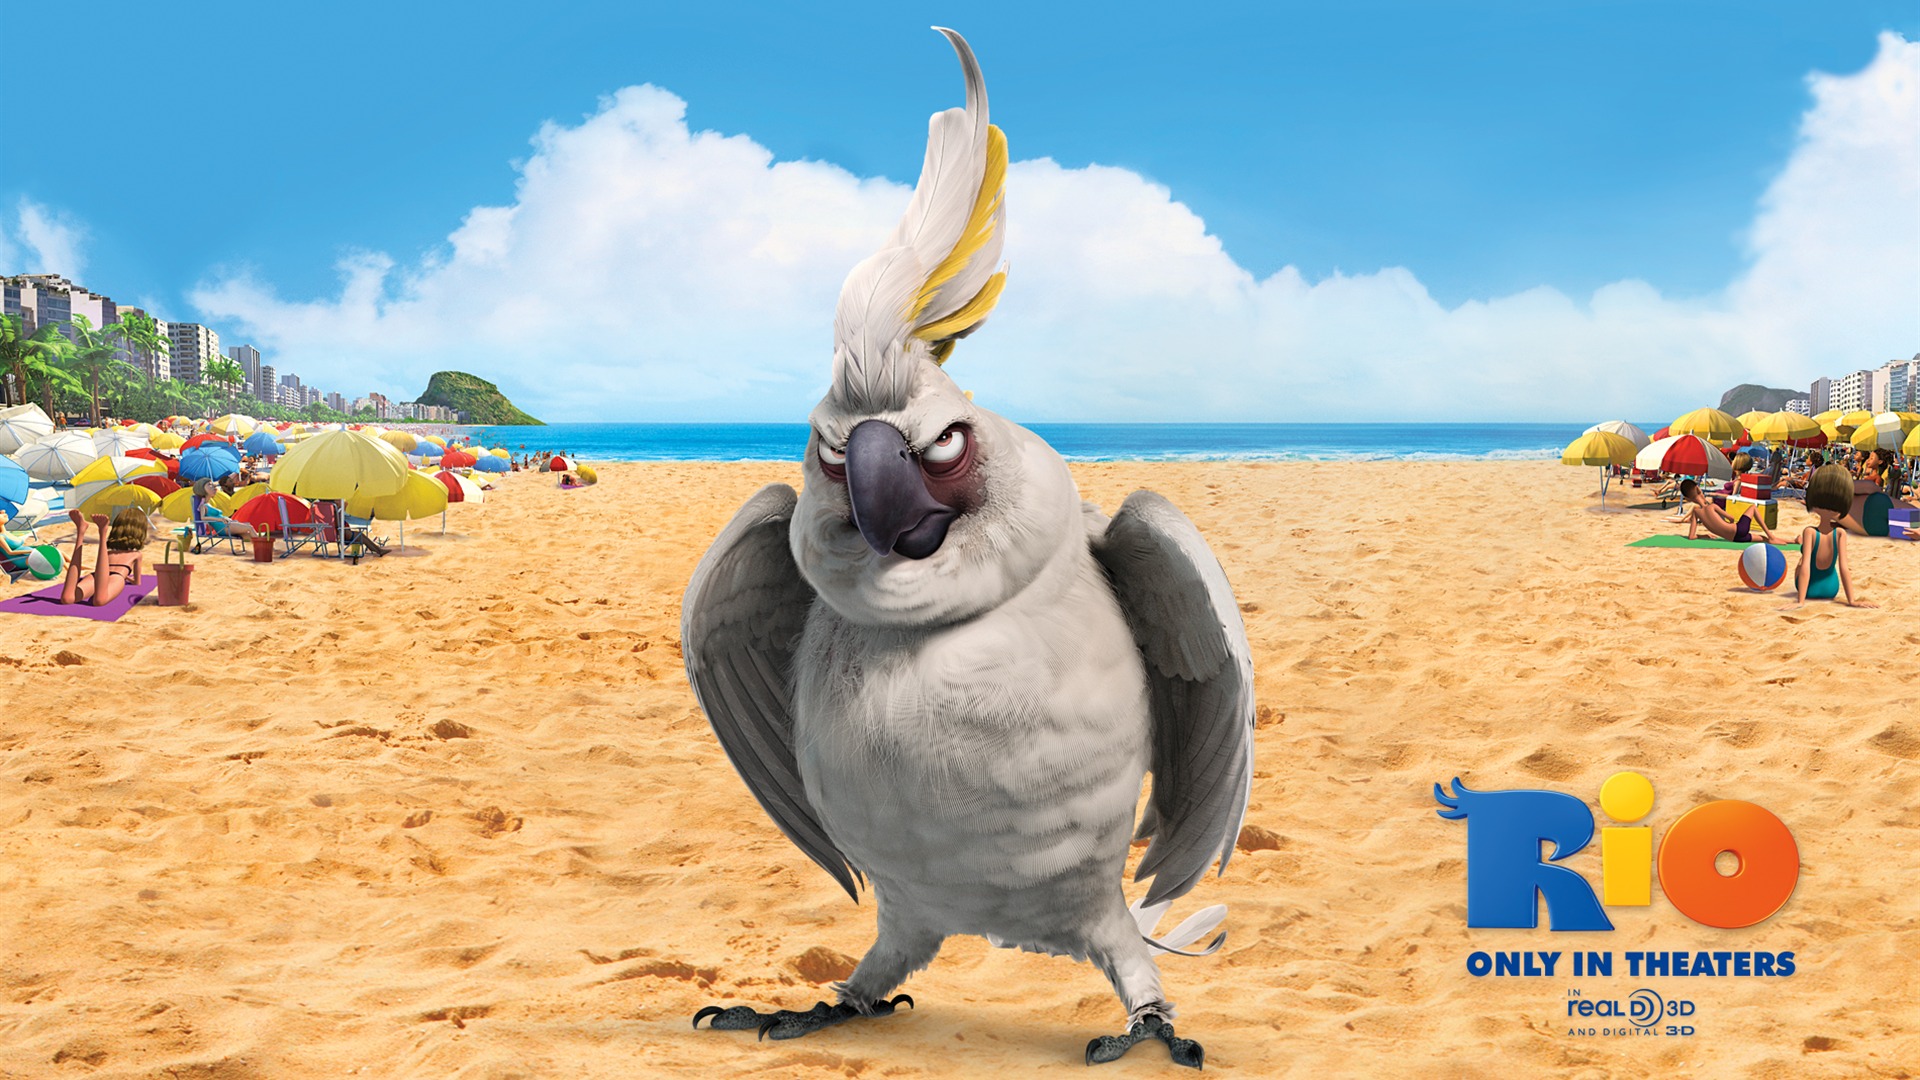 Rio 2011 wallpapers #10 - 1920x1080